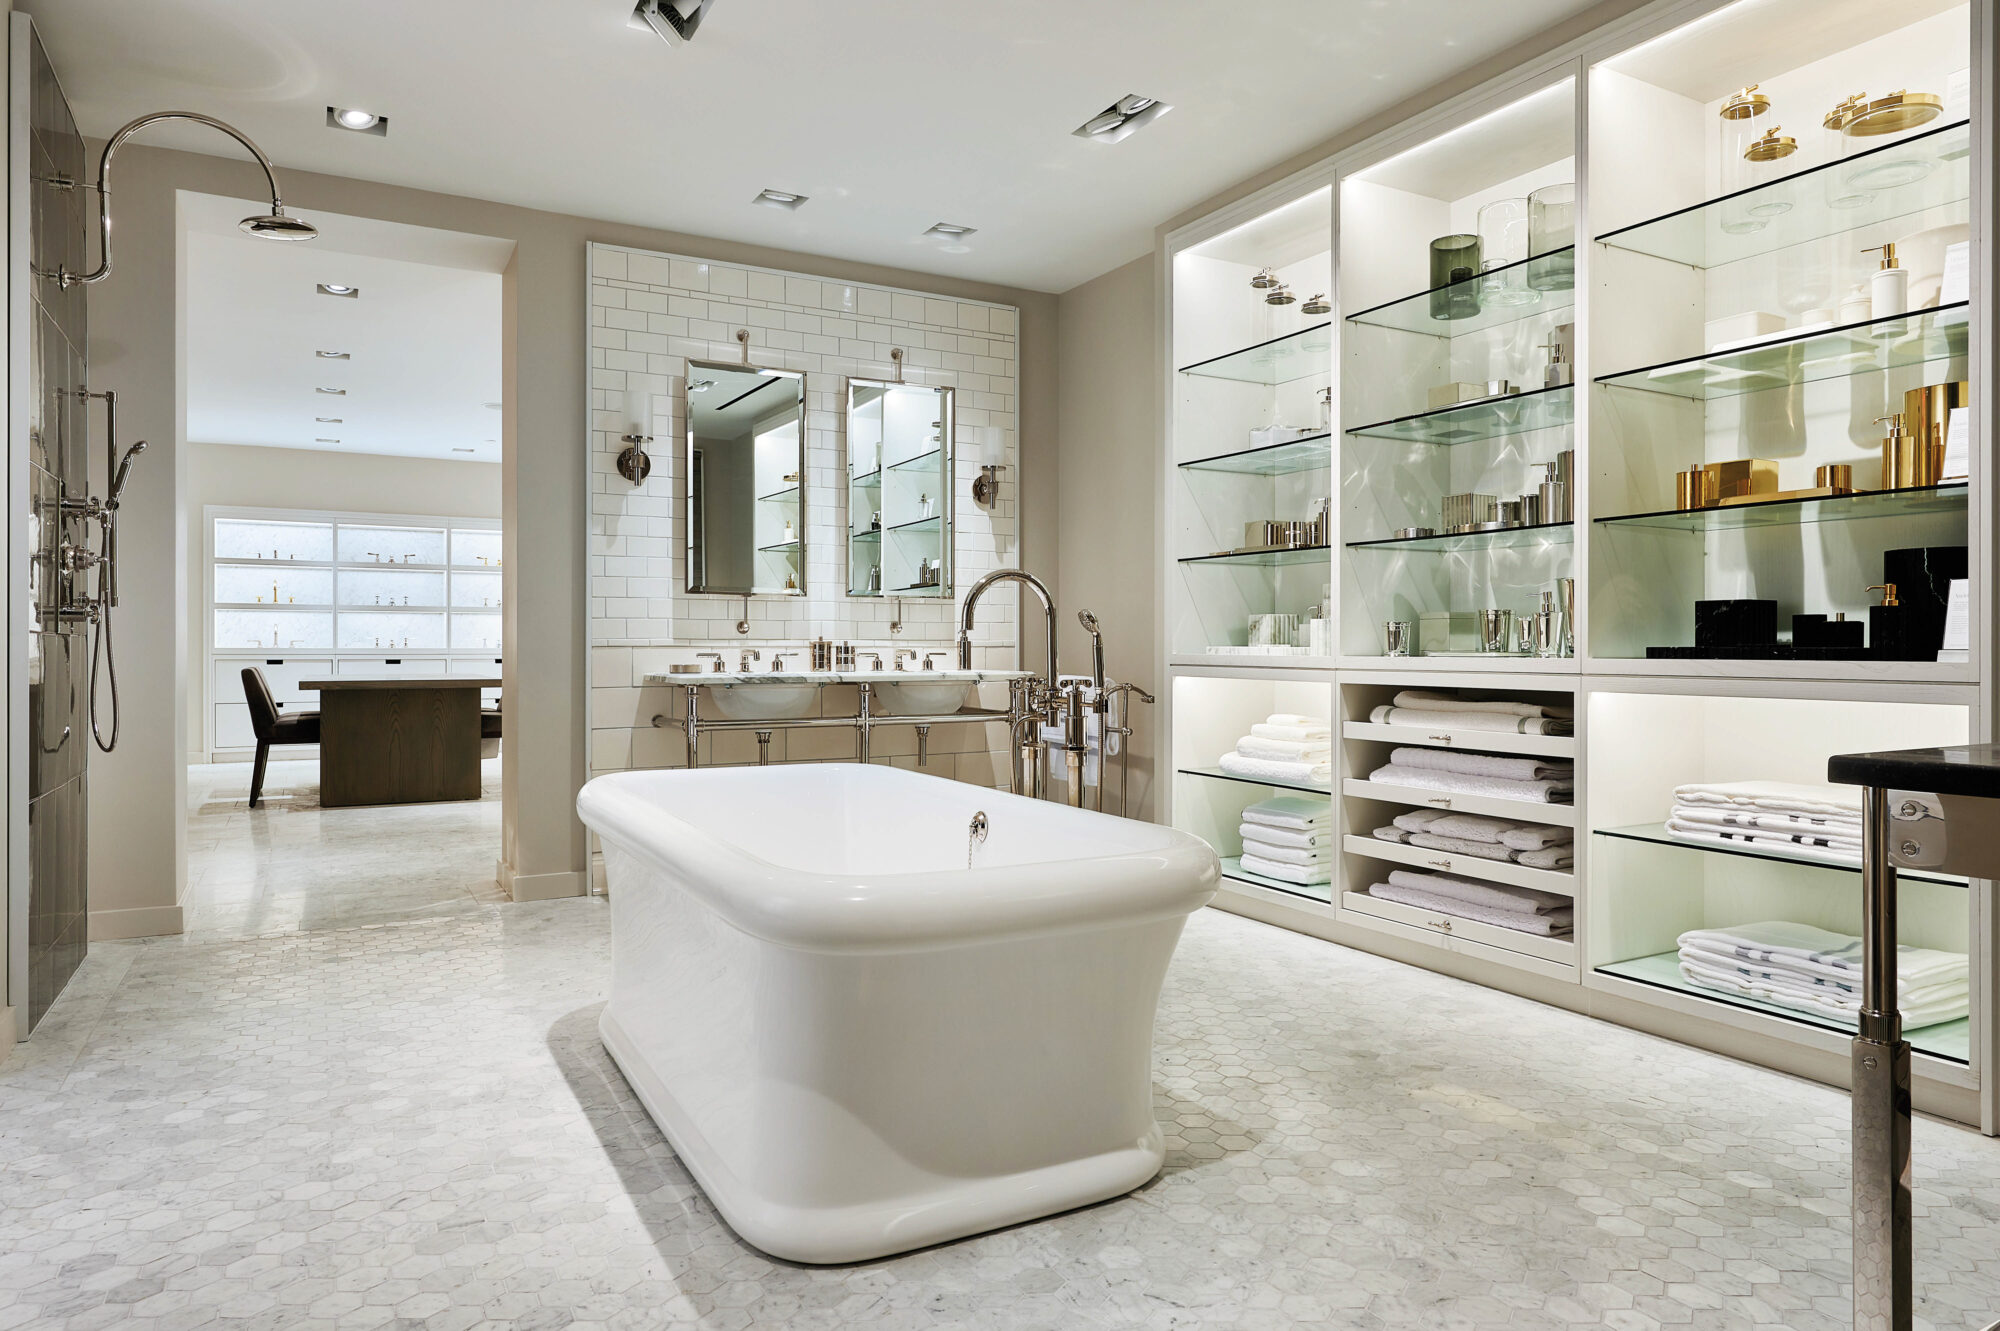 Luxury Kitchen Bath Products Await At This Newly Expanded Showroom Luxe Interiors Design